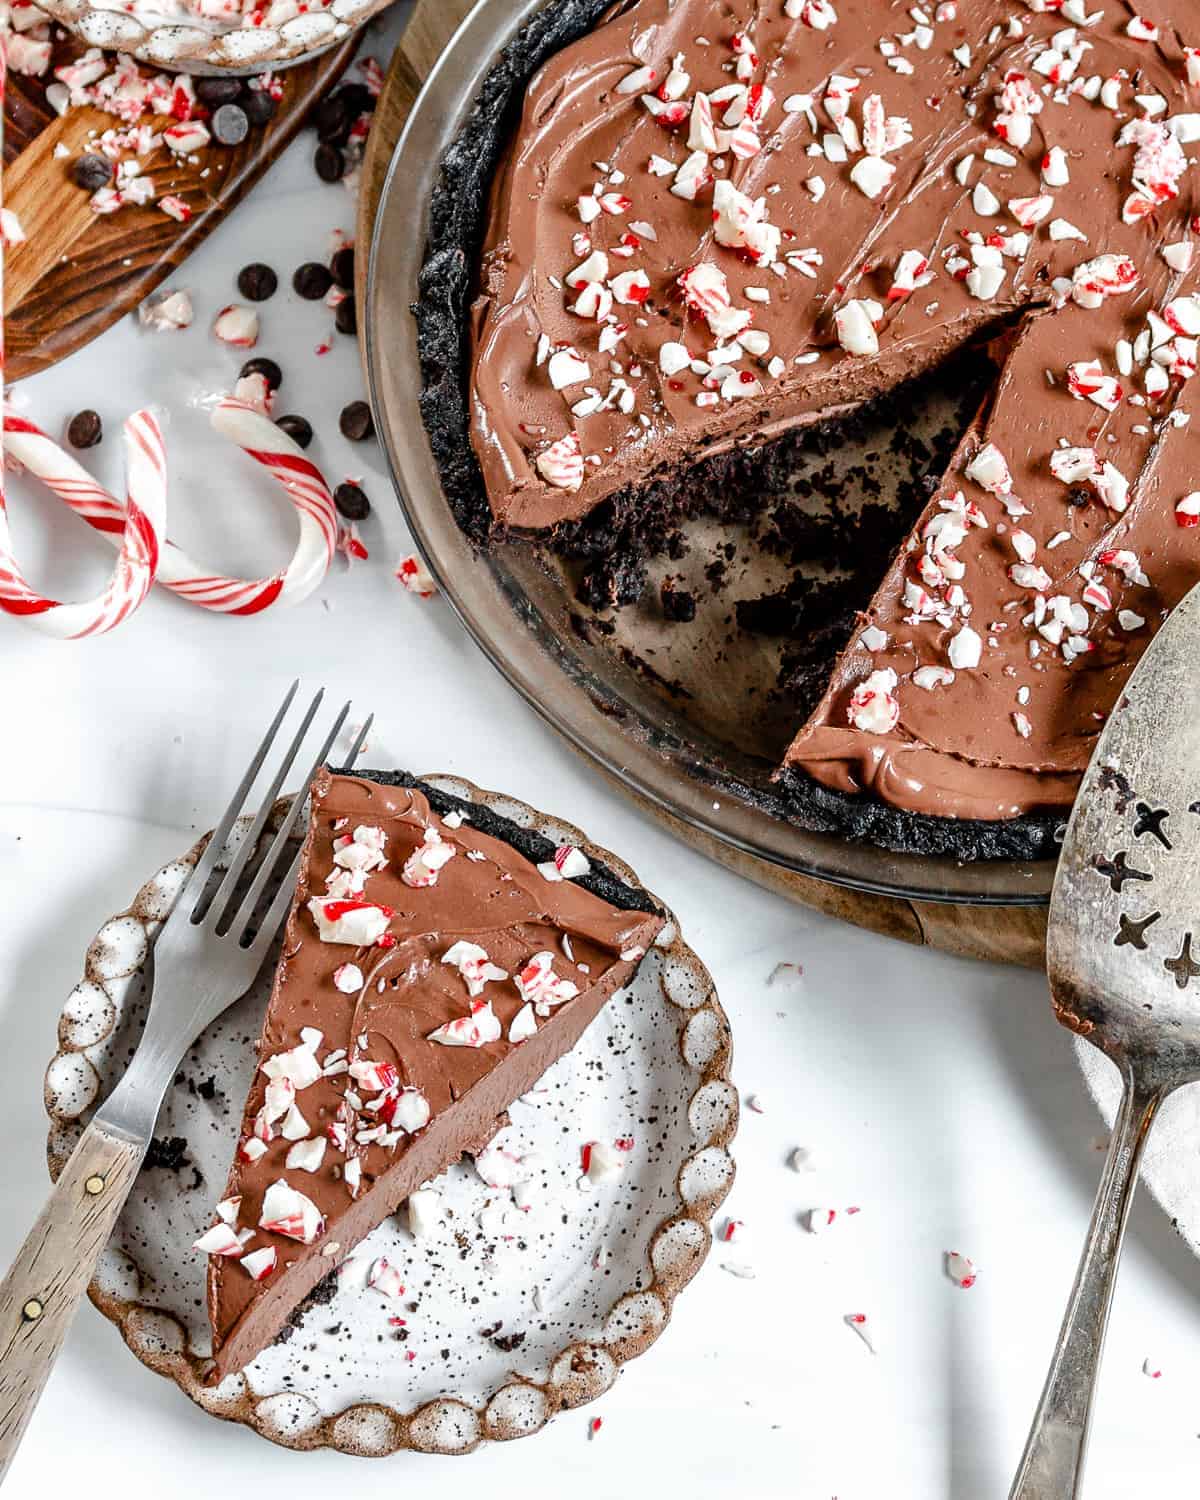 Complete slice of Silken Chocolate Peppermint Pie plated with more pie in the background.